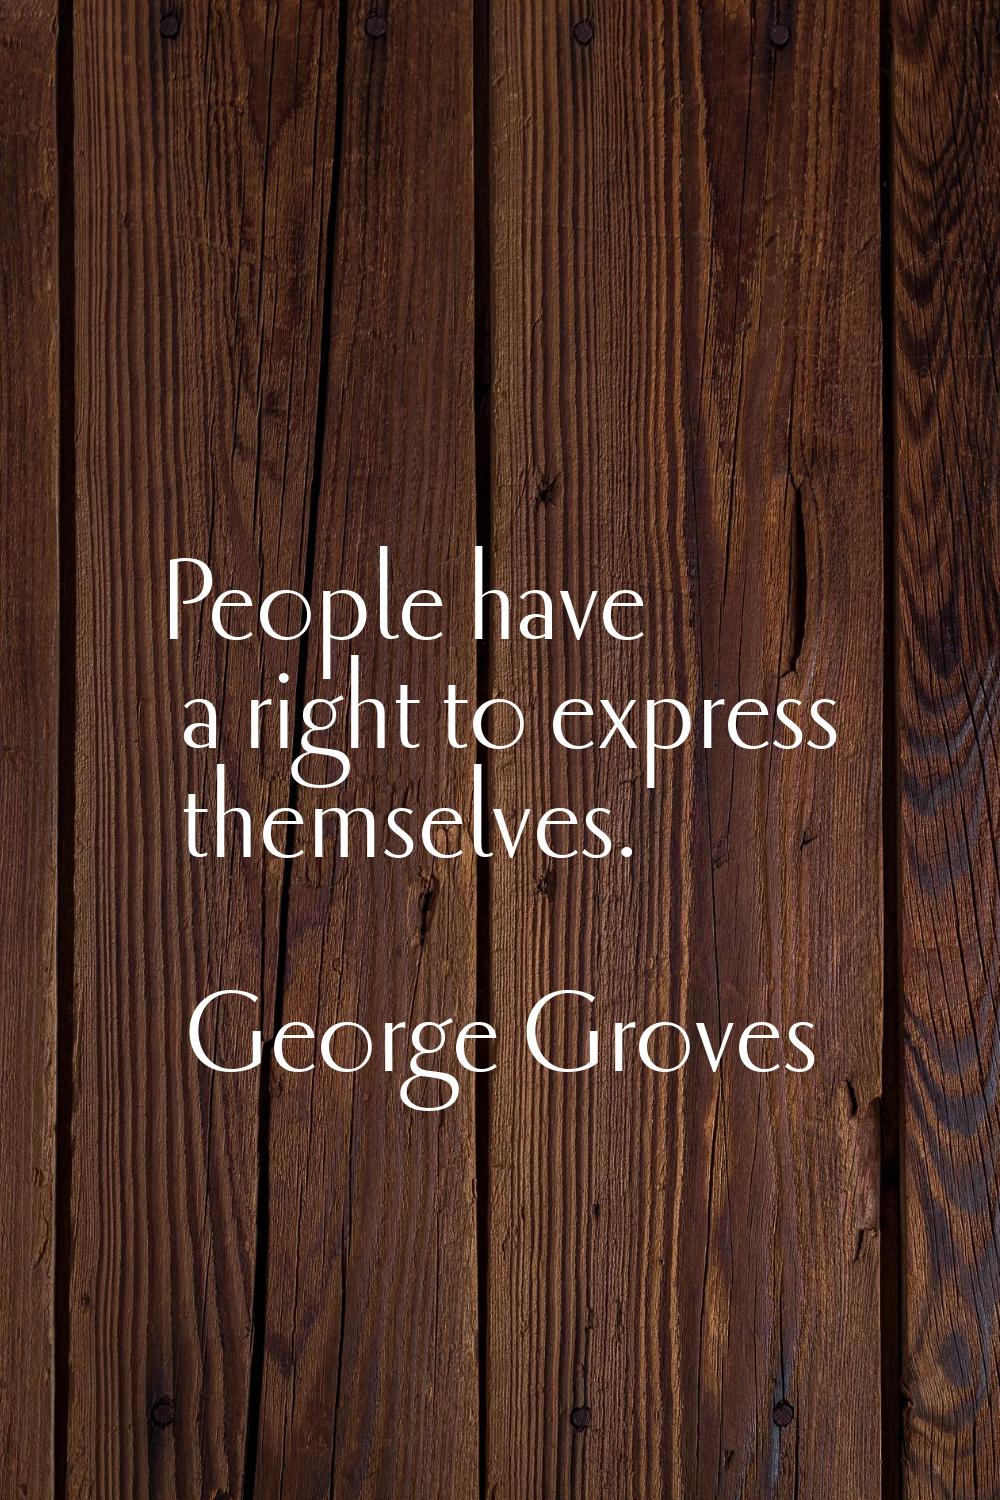 People have a right to express themselves.